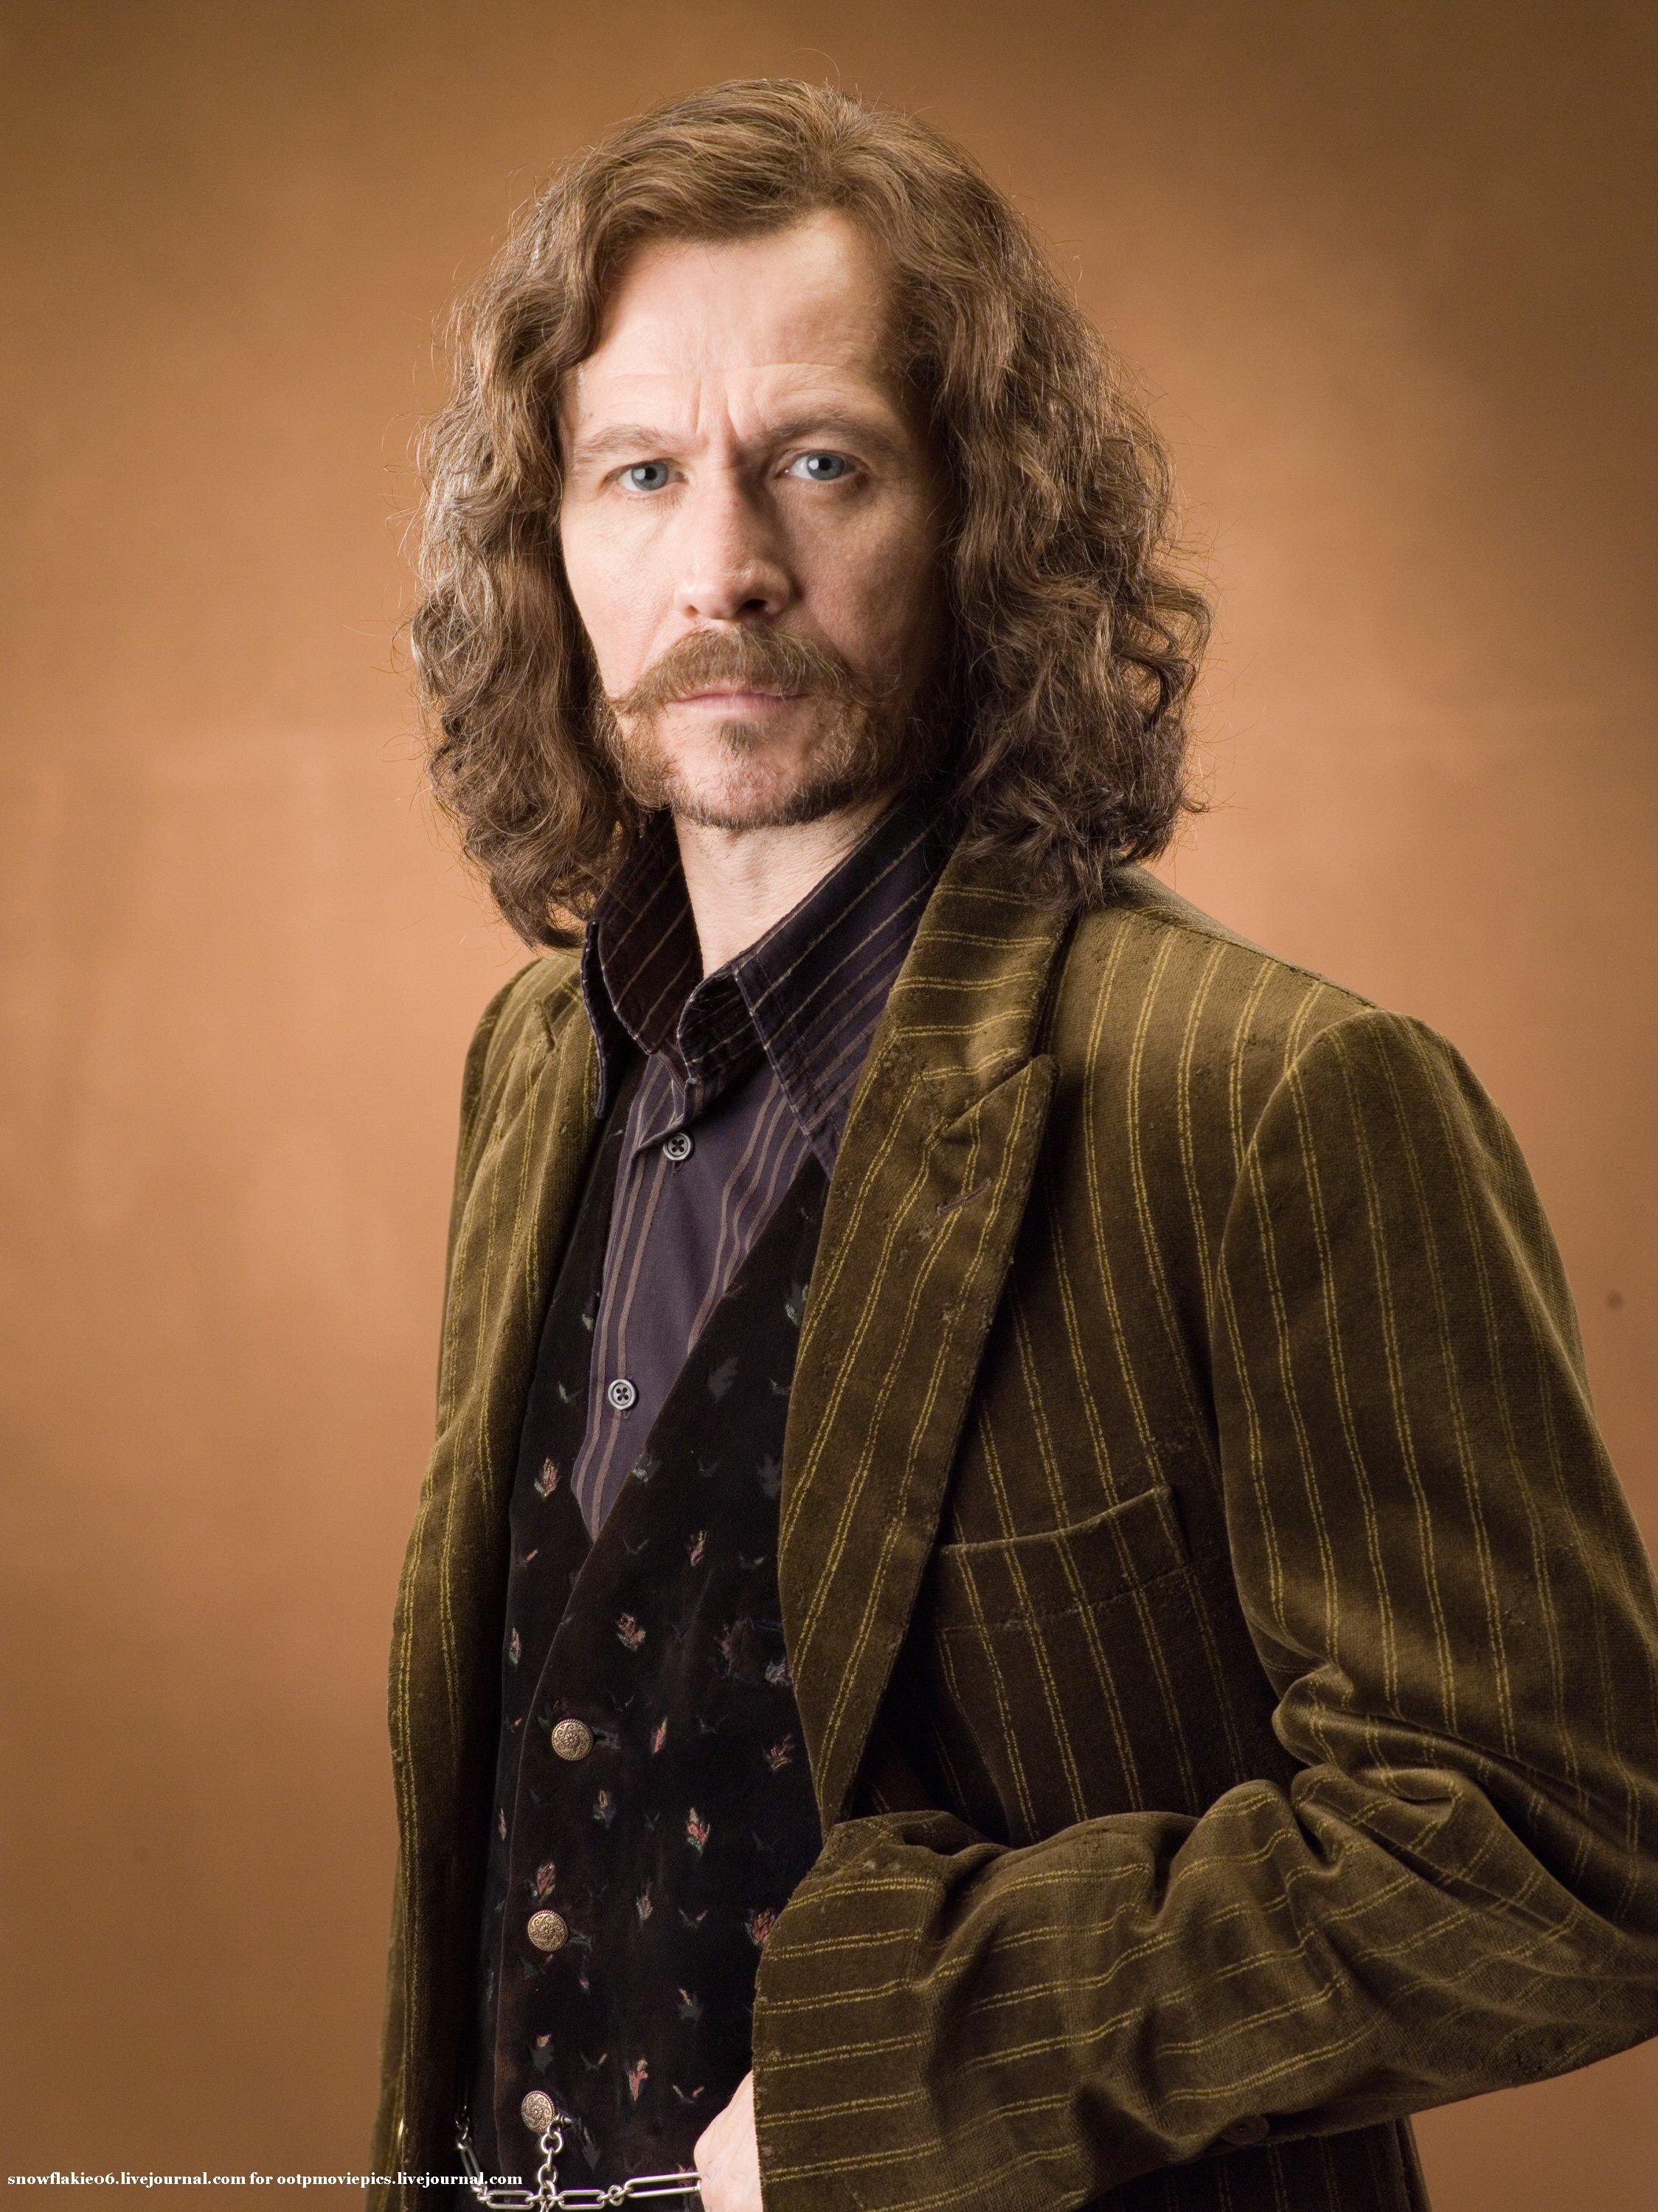 Sirius Black costume (Harry Potter and the Order of the Phoenix) | RPF  Costume and Prop Maker Community